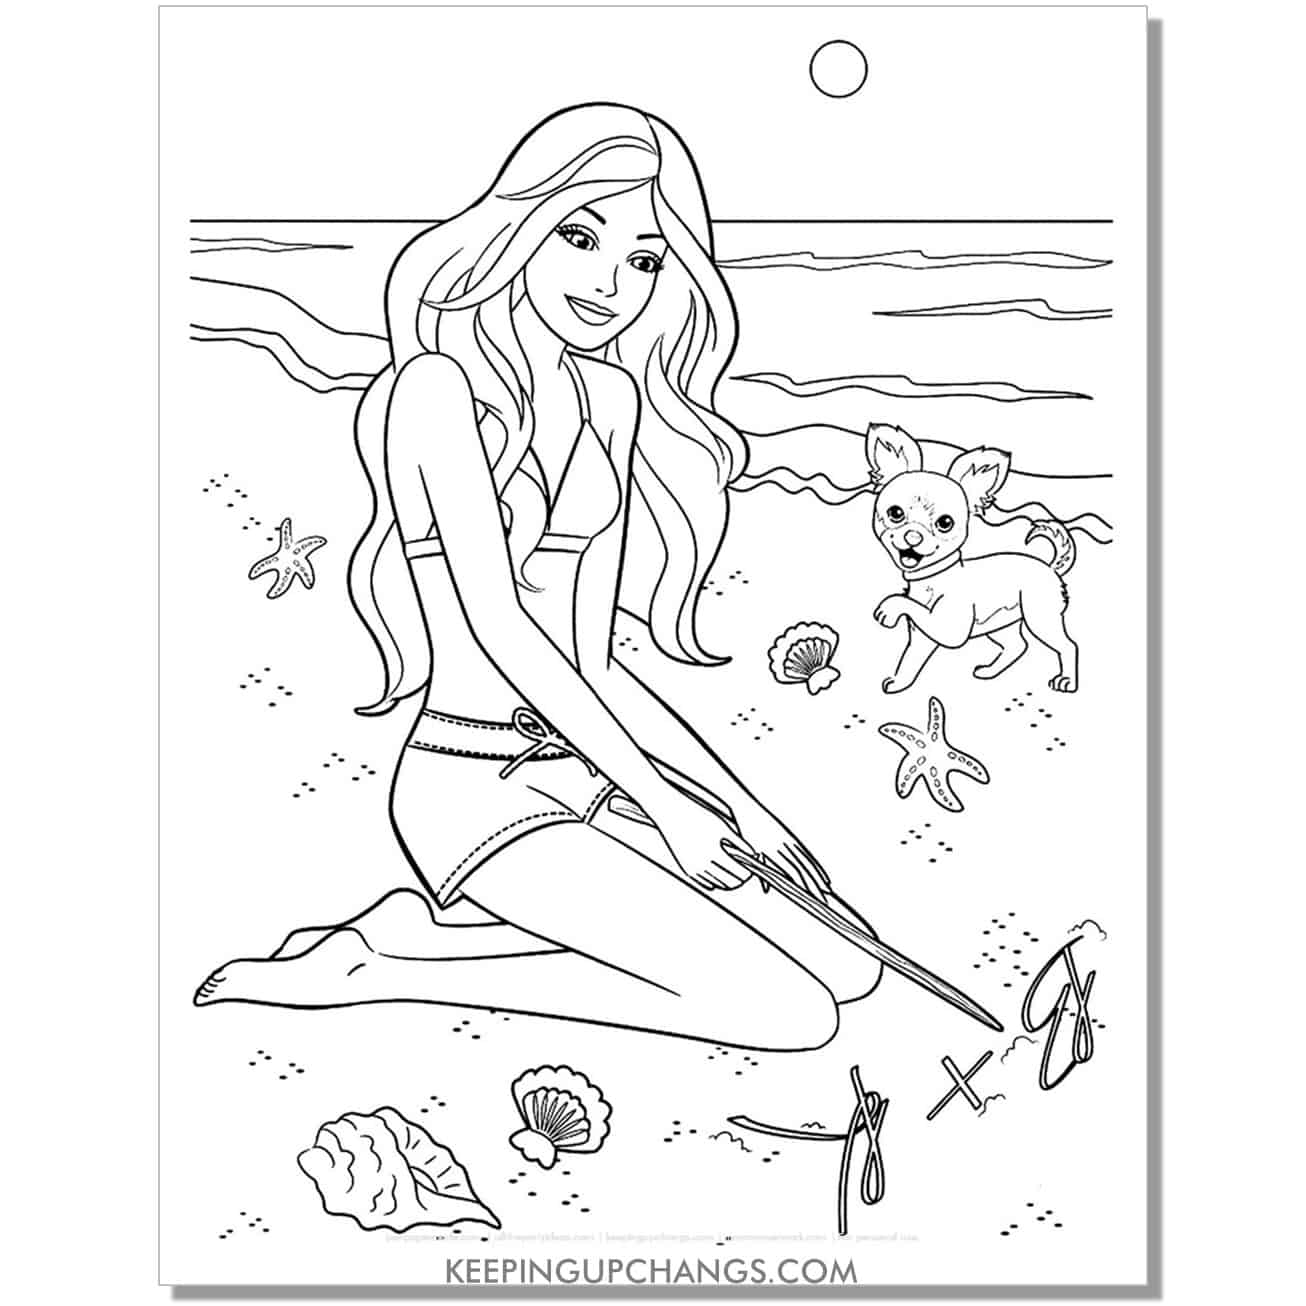 barbie writing B and K in sand coloring page.